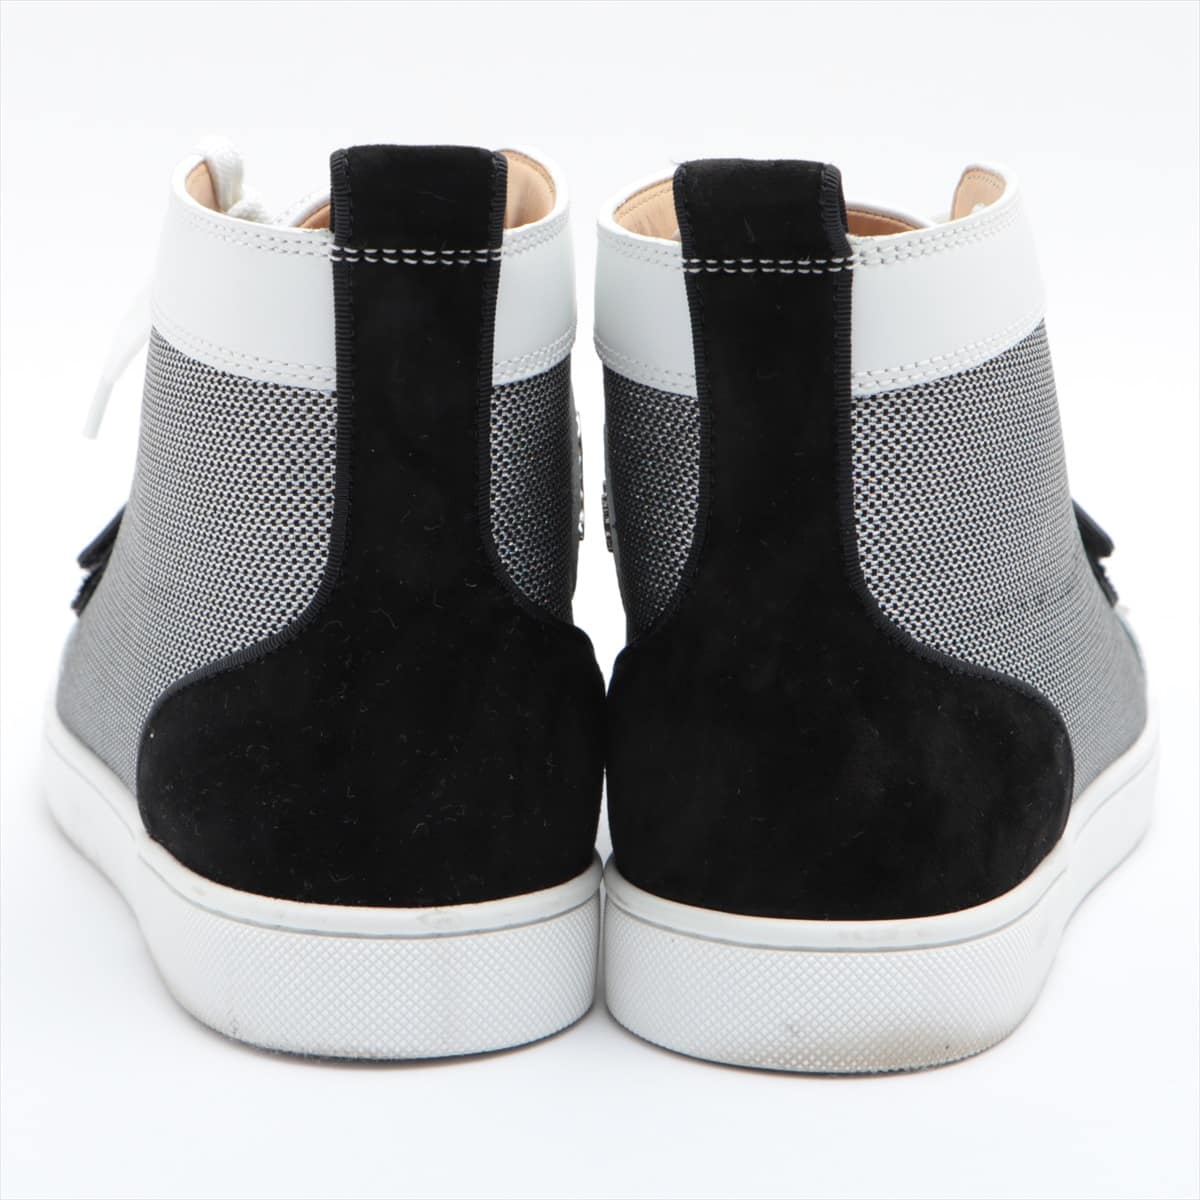 Christian Louboutin Lewis Spike Canvas & leather High-top Sneakers 42 Men's Black × White Spike Studs